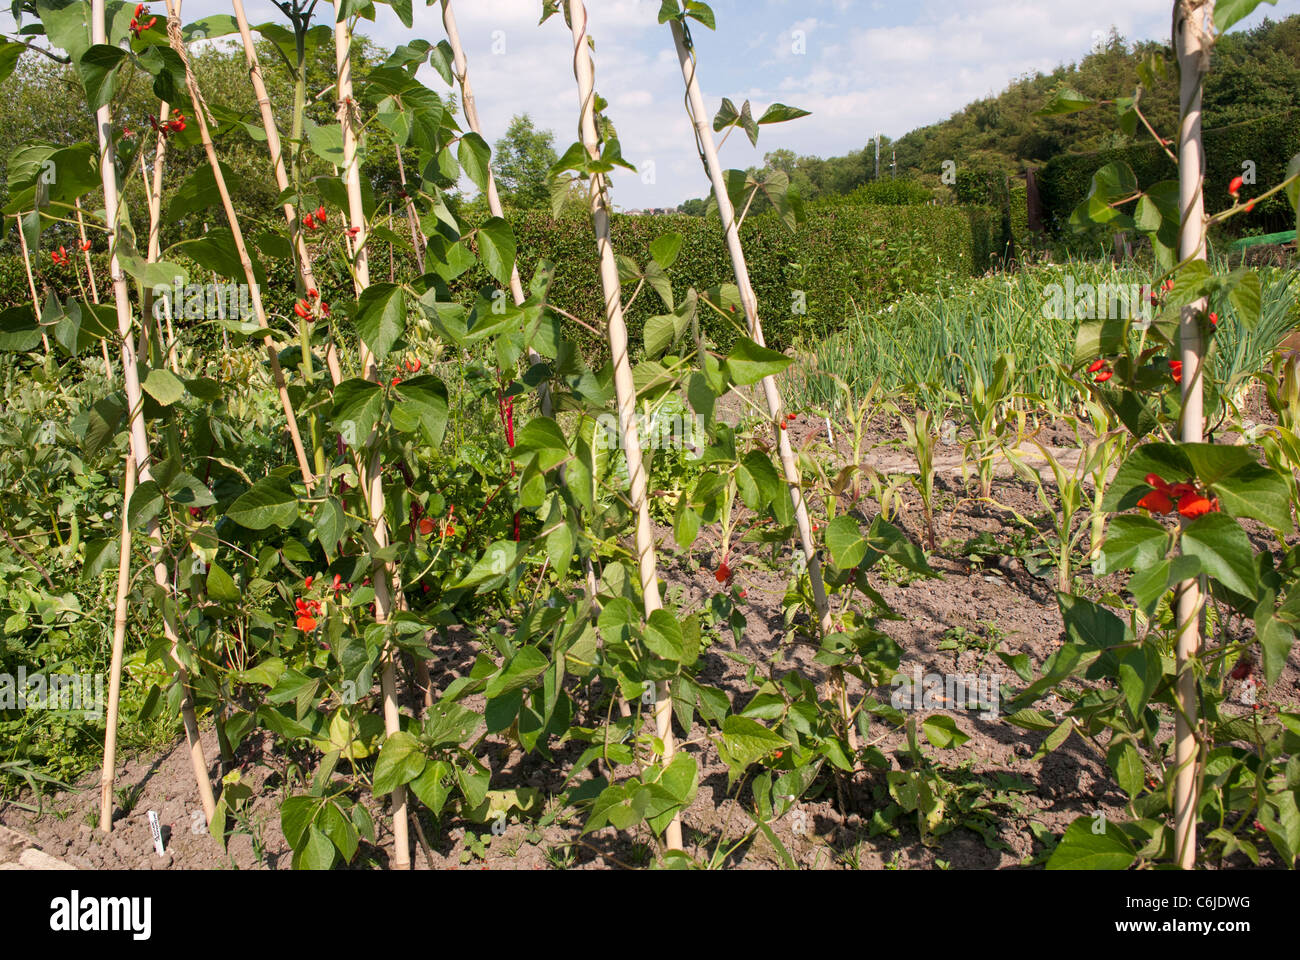 View of an allotment and runner beans 'Armstrong', South Yorkshire, England. Stock Photo